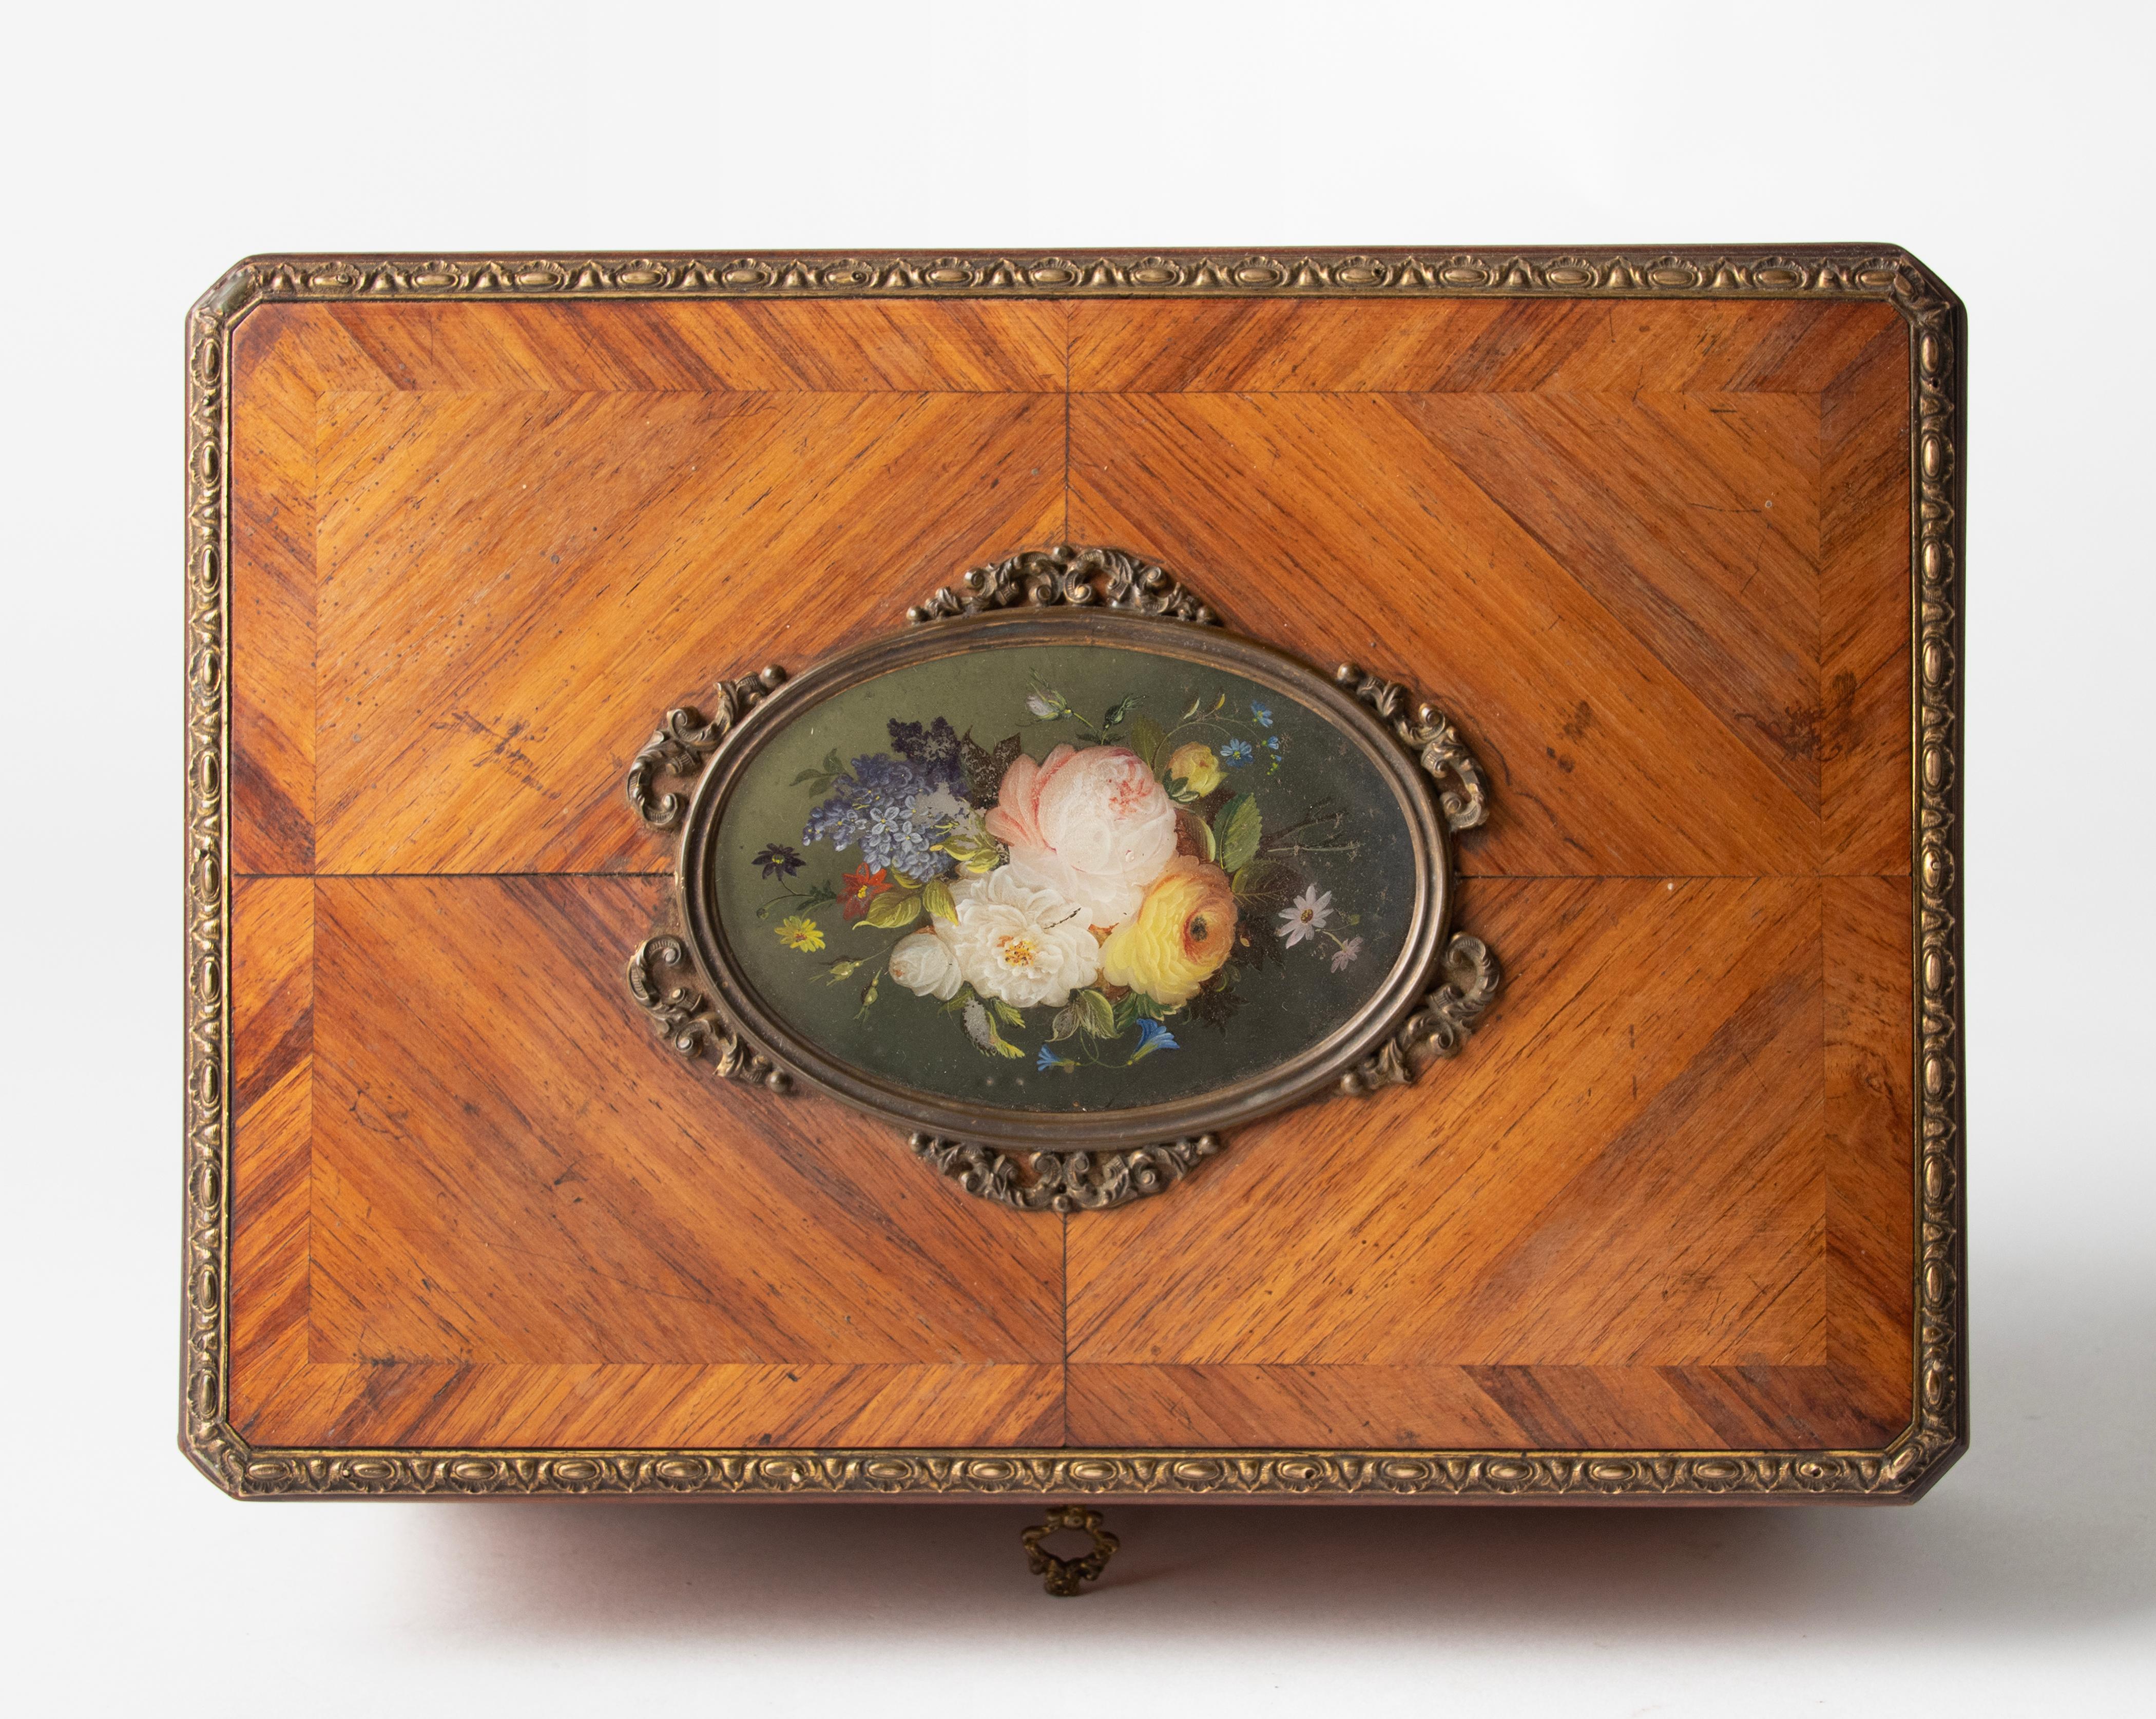 Beautiful antique storage box from the French Napoleon III period. Marquetry inlay with bronze mounts and on the lid an oval painting of a flower still life (hand painted).
The interior is lined with light colored silk fabric. To box is in good